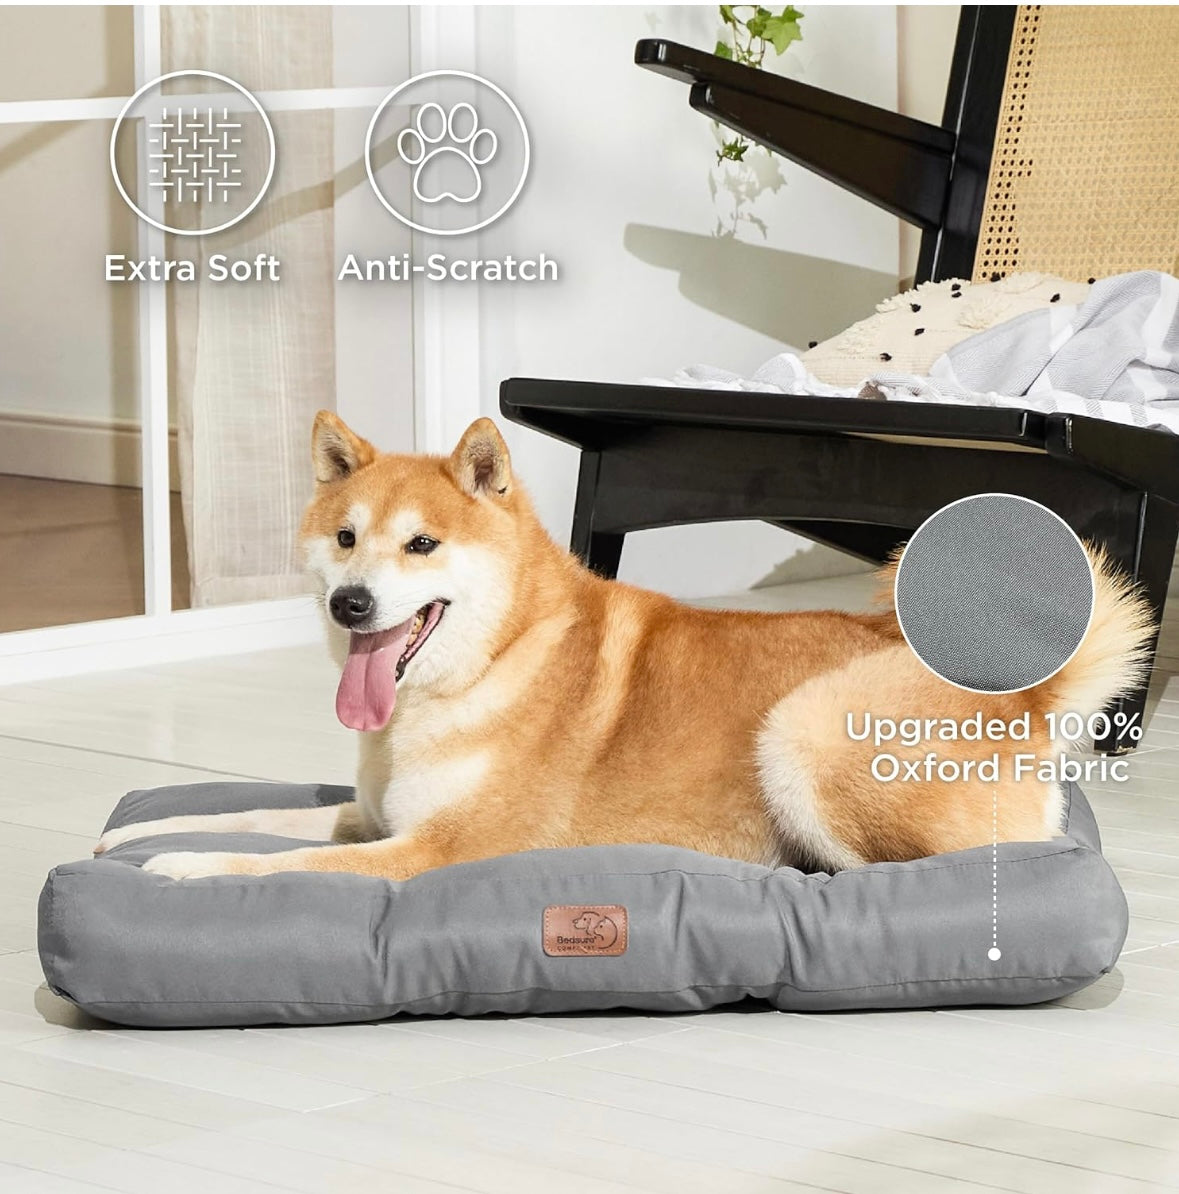 Waterproof Dog Bed Large - Washable Dog Bed Mattress with Oxford Fabric